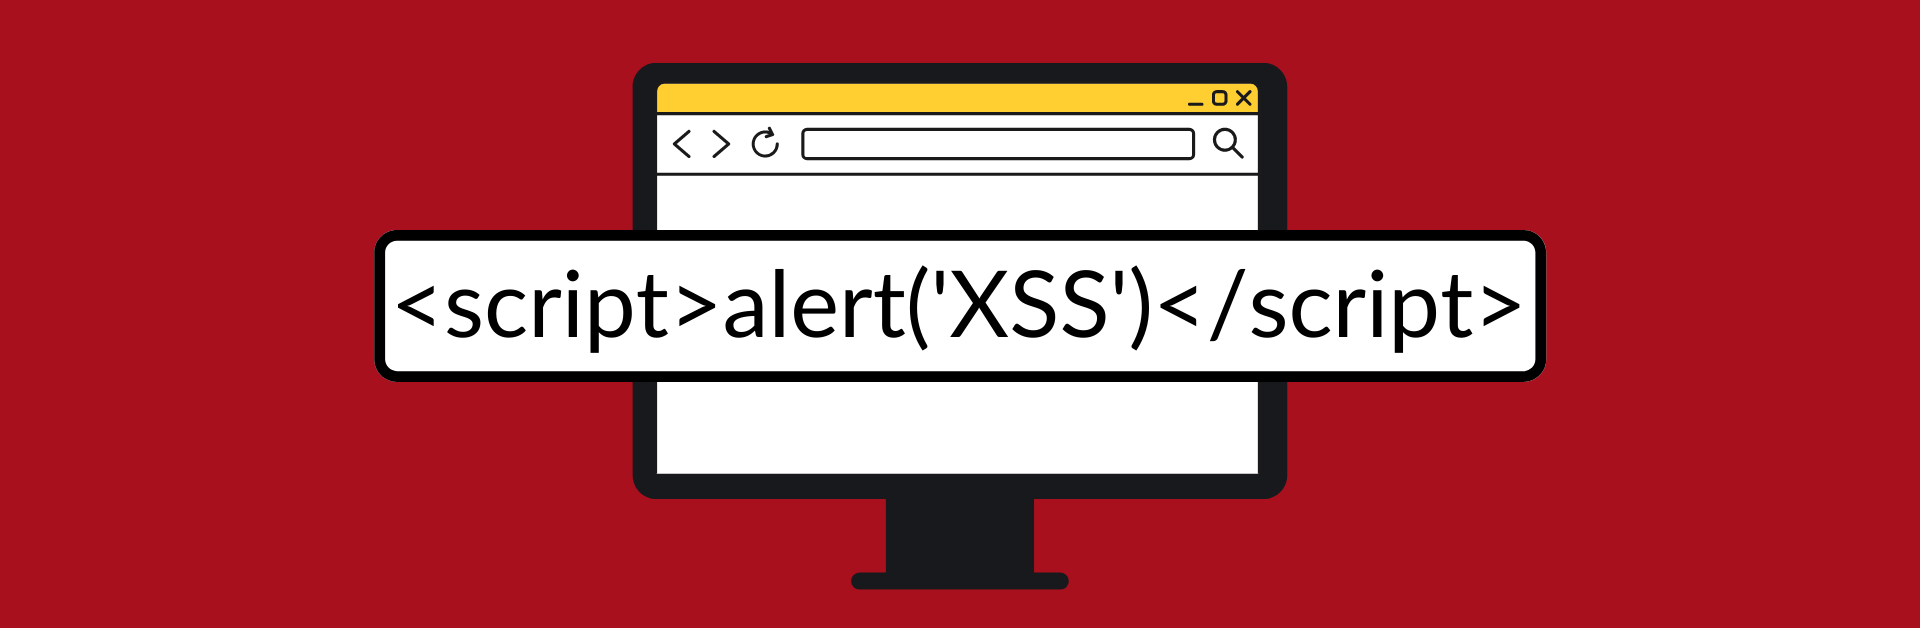 Clarifying Hacking with XSS